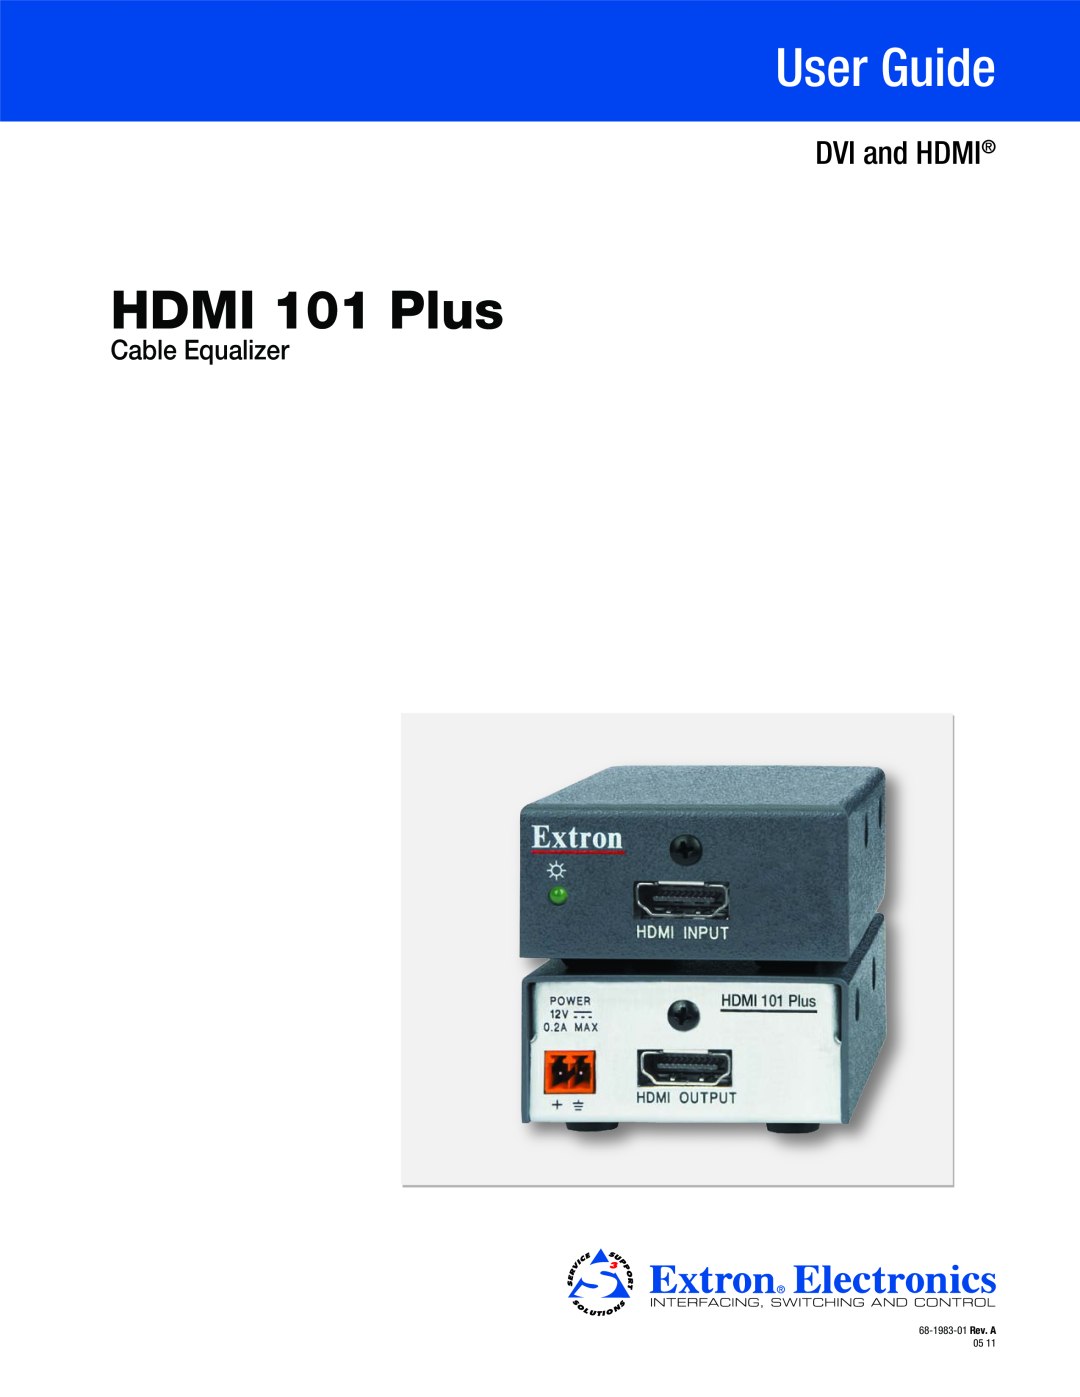 Extron electronic 101 PLUS setup guide HDMI 101 Plus Setup Guide, Overview, Front Panel, Rear Panel, Installation 